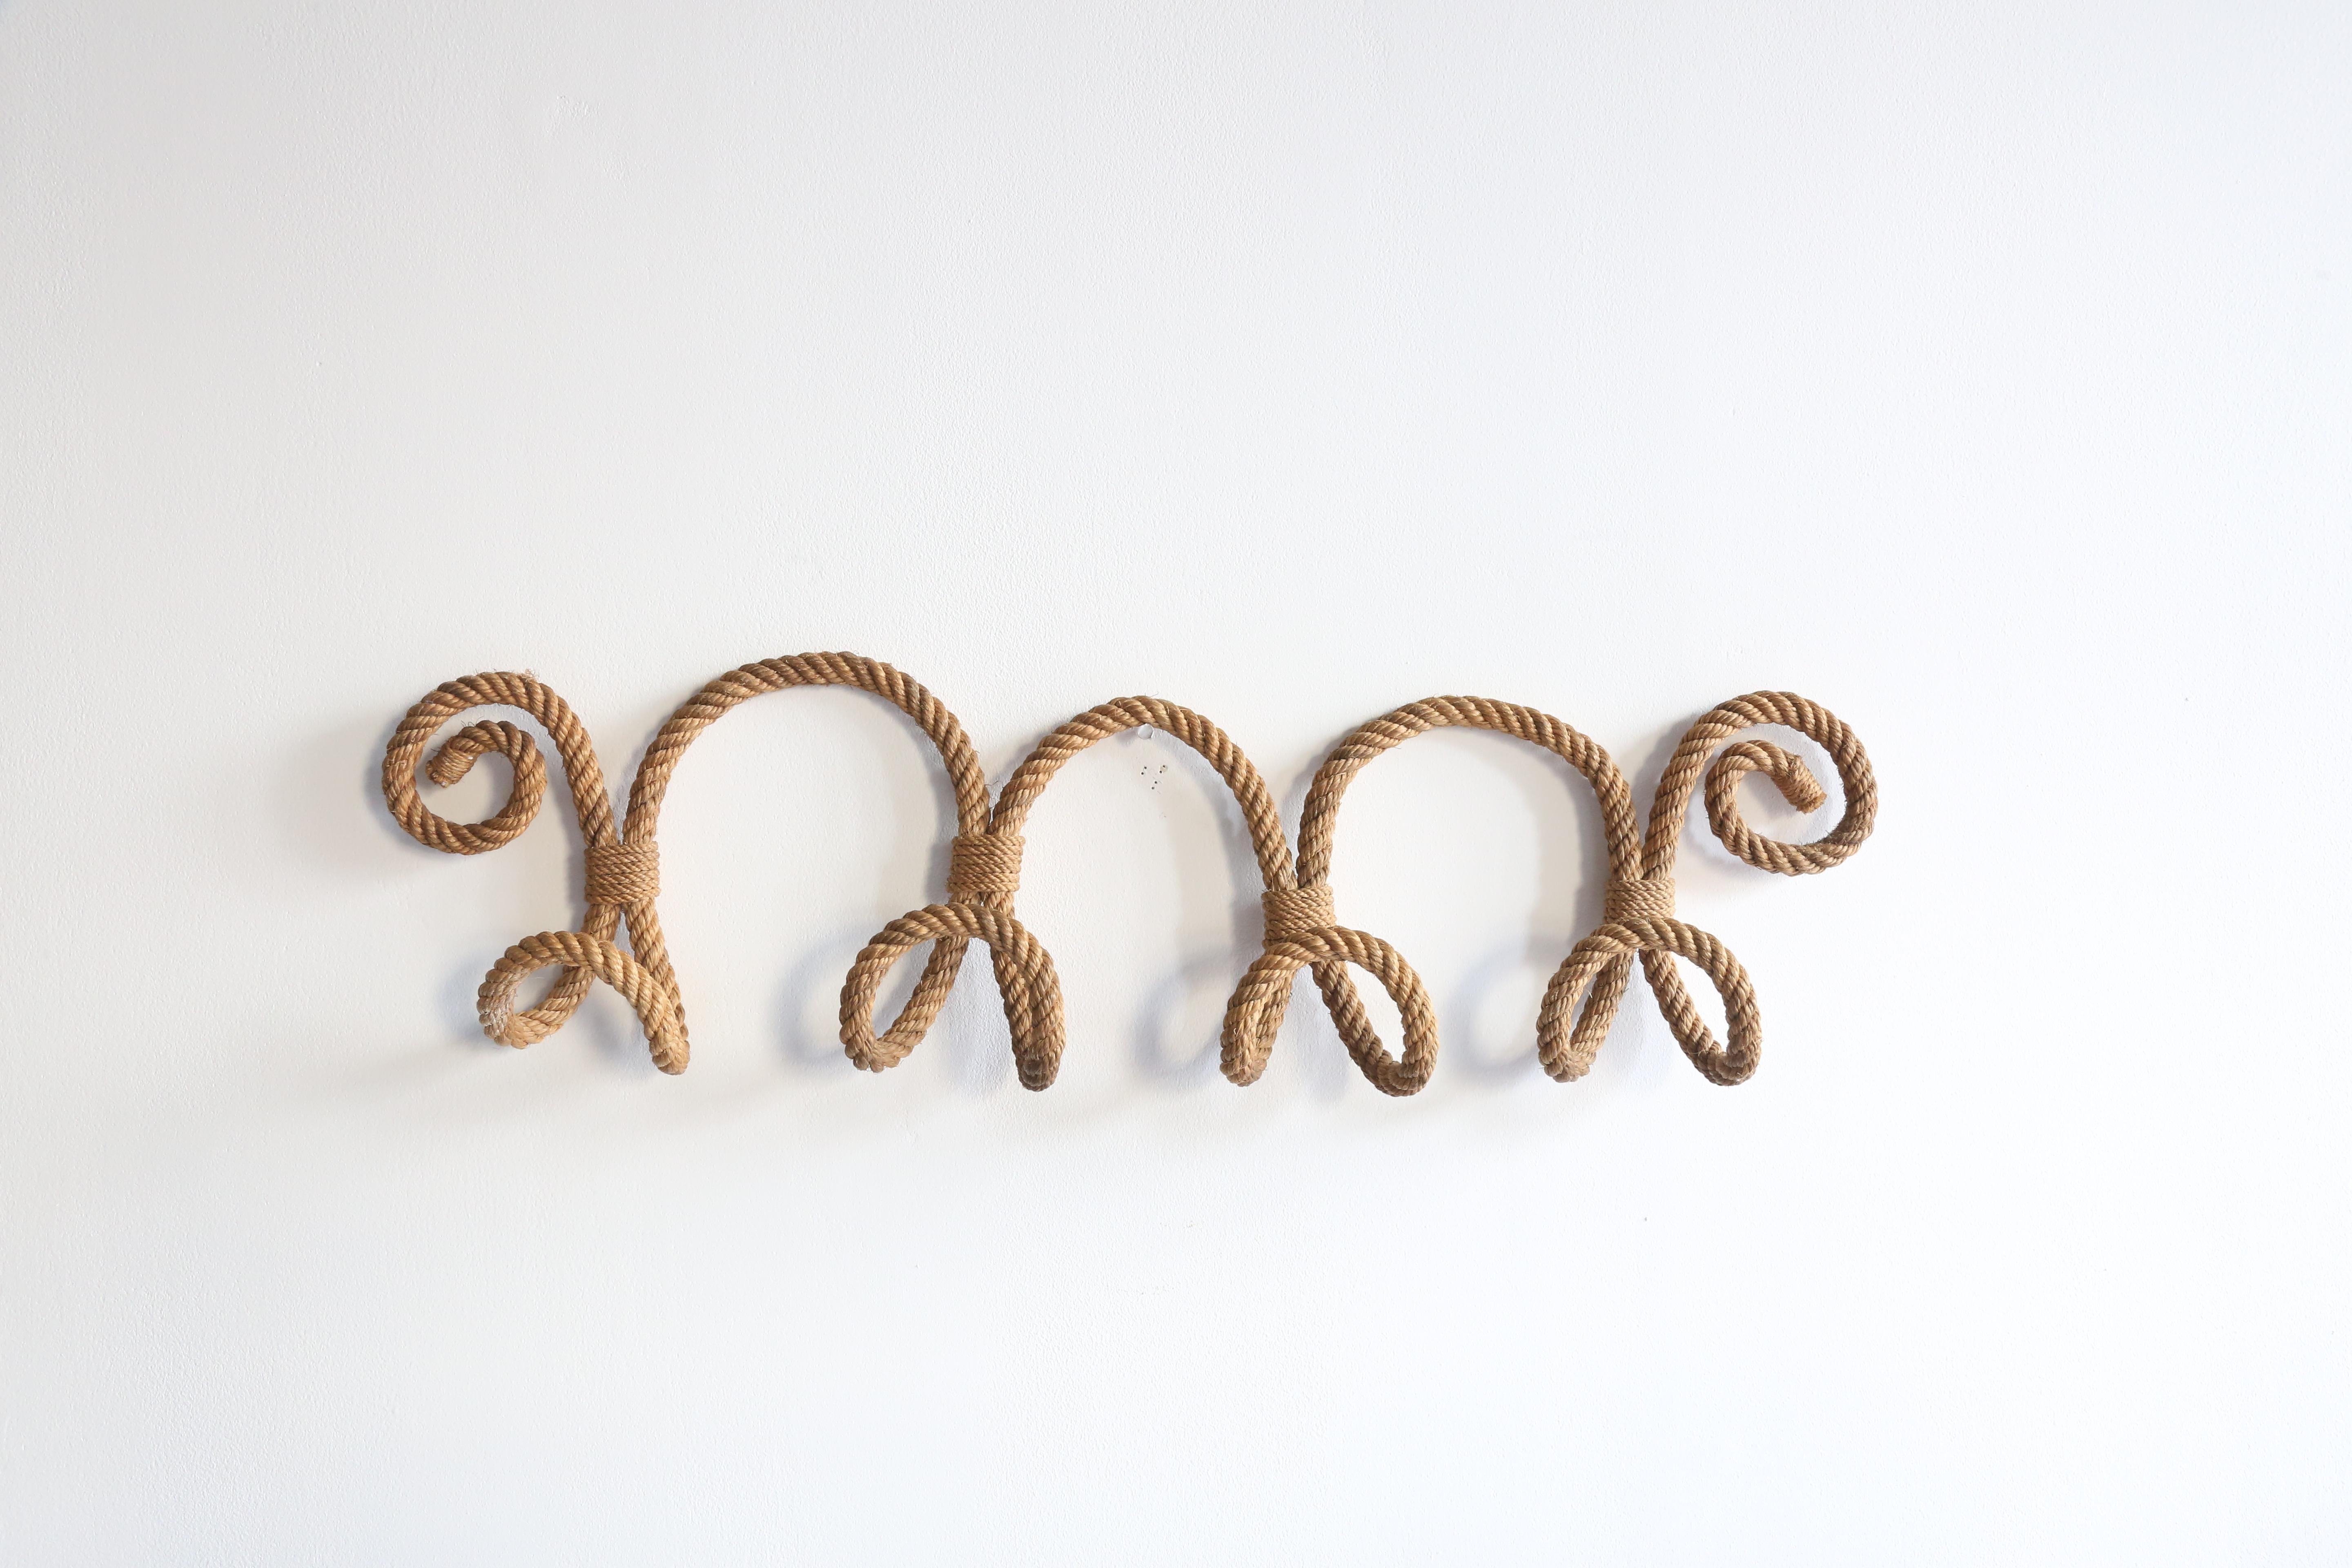 Beautiful French wall hook made of thick twisted rope and twine by Audoux-Minet. 

Great curved tongue shaped hooks, perfect to hold hats or coats.

Typical for the technique and design style of Adrien Audoux and Frida Minet, using traditional